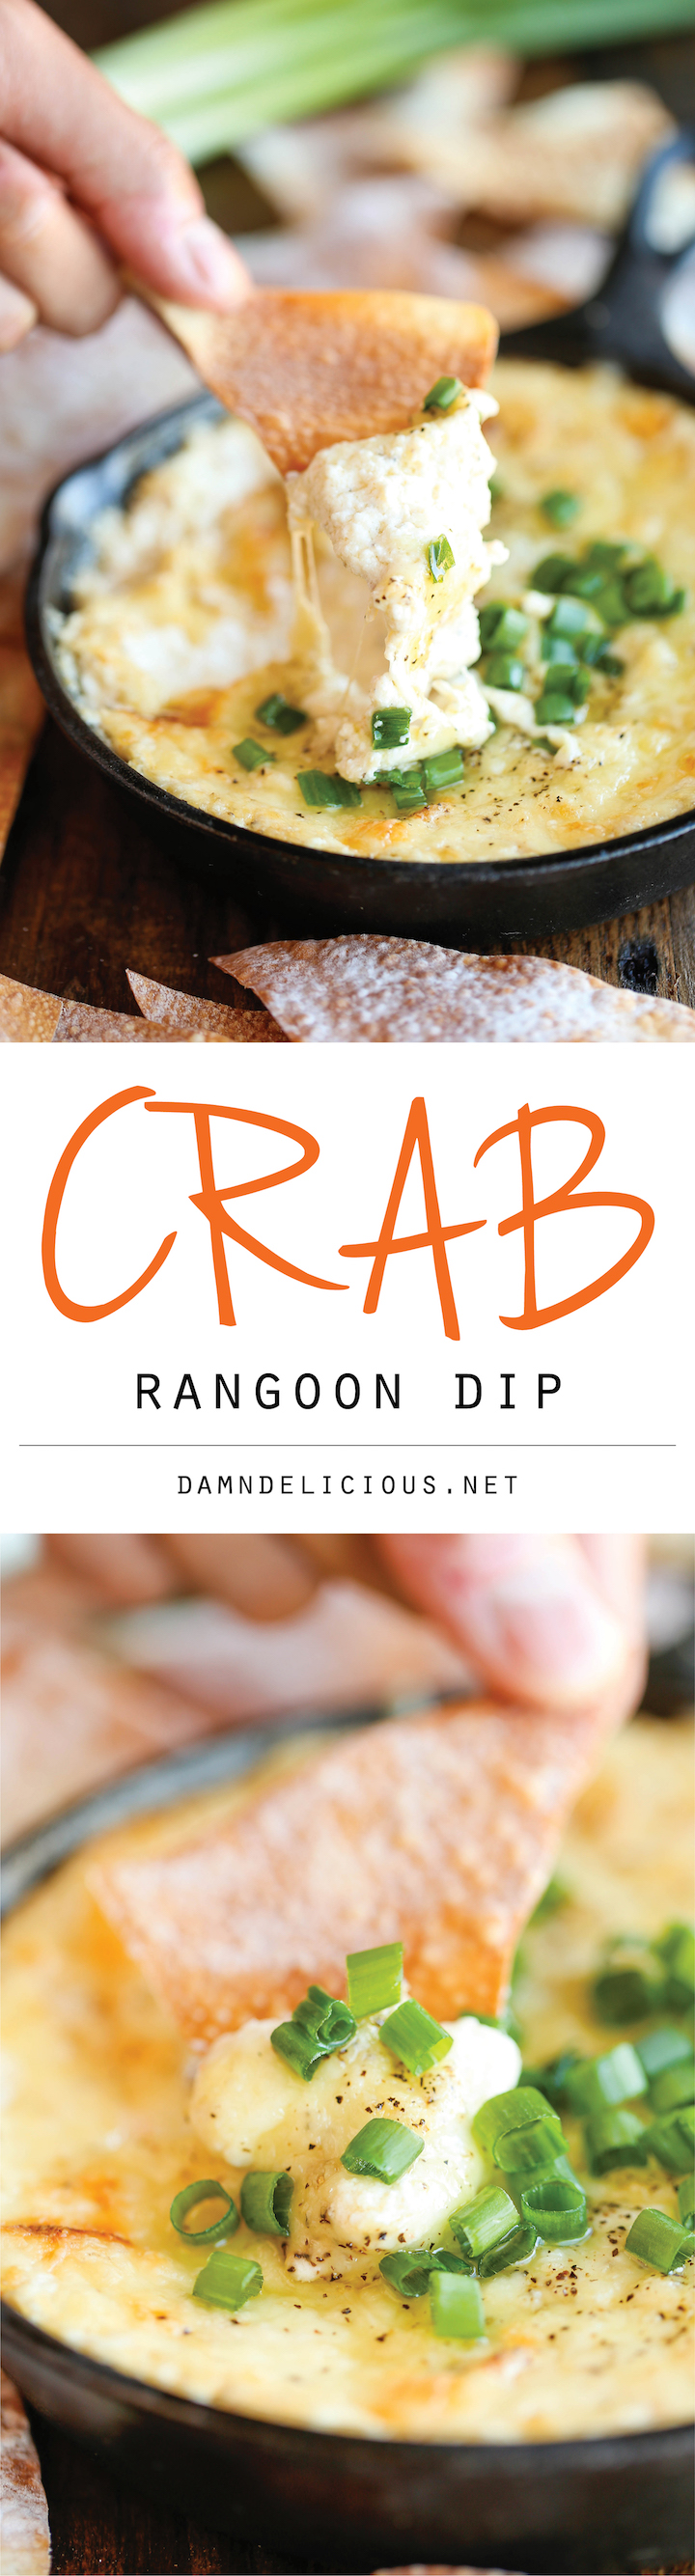 Crab Rangoon Dip - A take-out favorite made into the creamiest, cheesiest dip of all, served with the easiest homemade wonton chips!